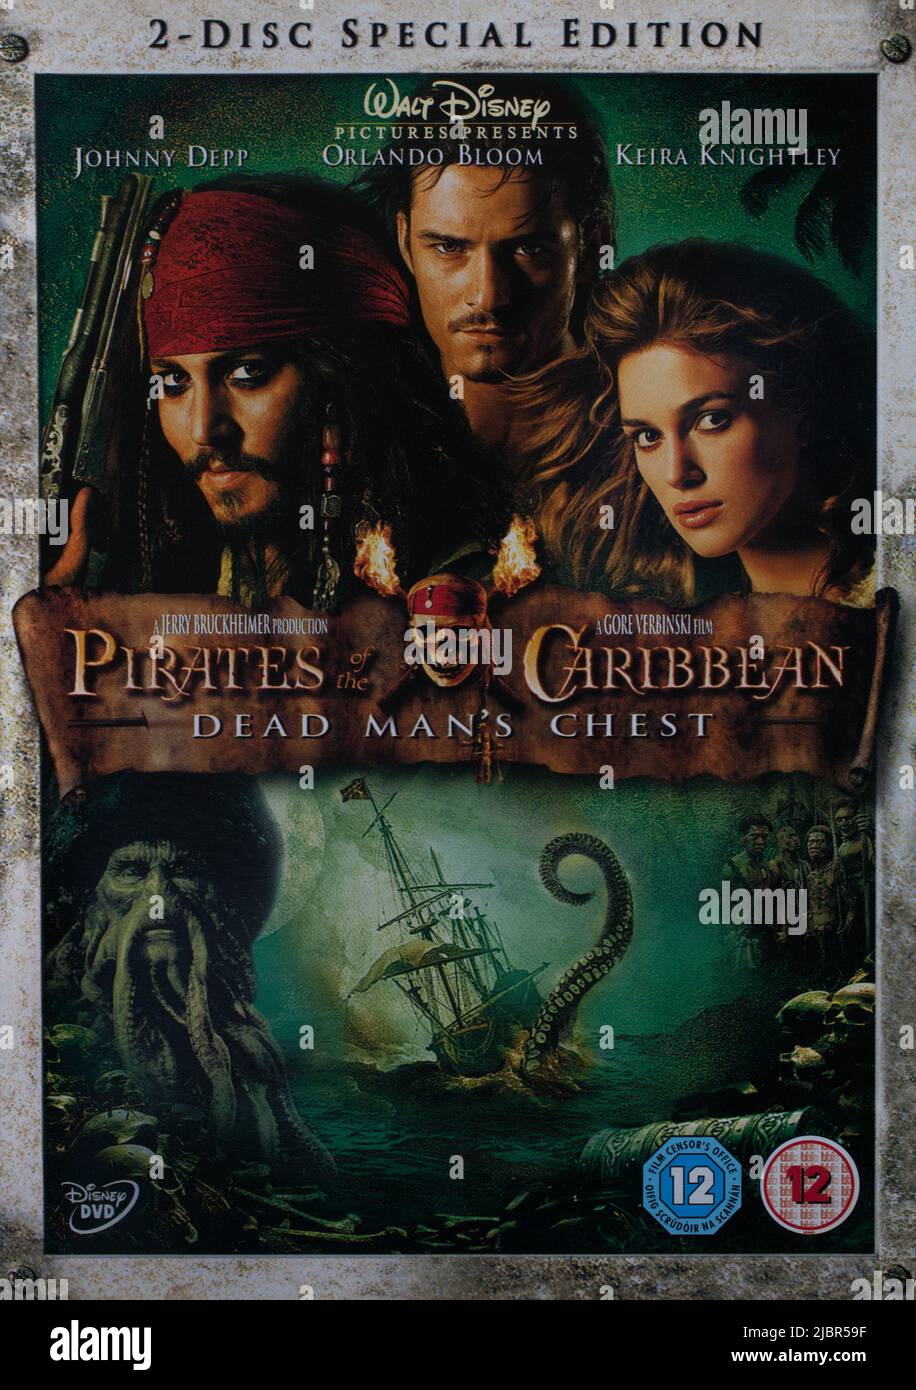 The DVD cover to the movie, Pirates of the Caribbean, Dead Man's Chest Stock Photo